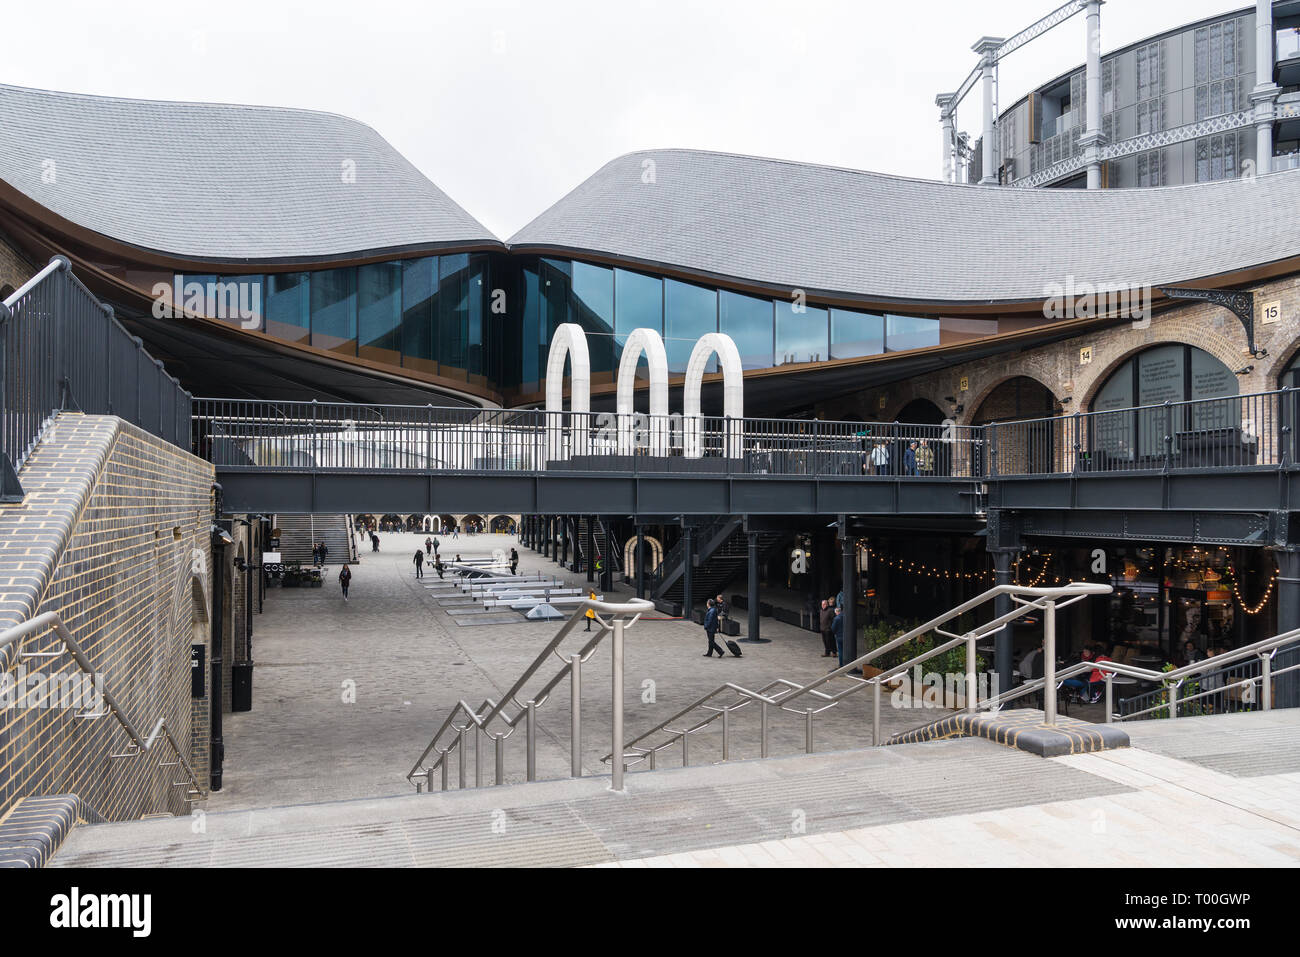 People at Coal Drops Yard, a refurbished area of Victorian buildings converted into shops, restaurants and leisure facilities, Kings Cross, London Stock Photo